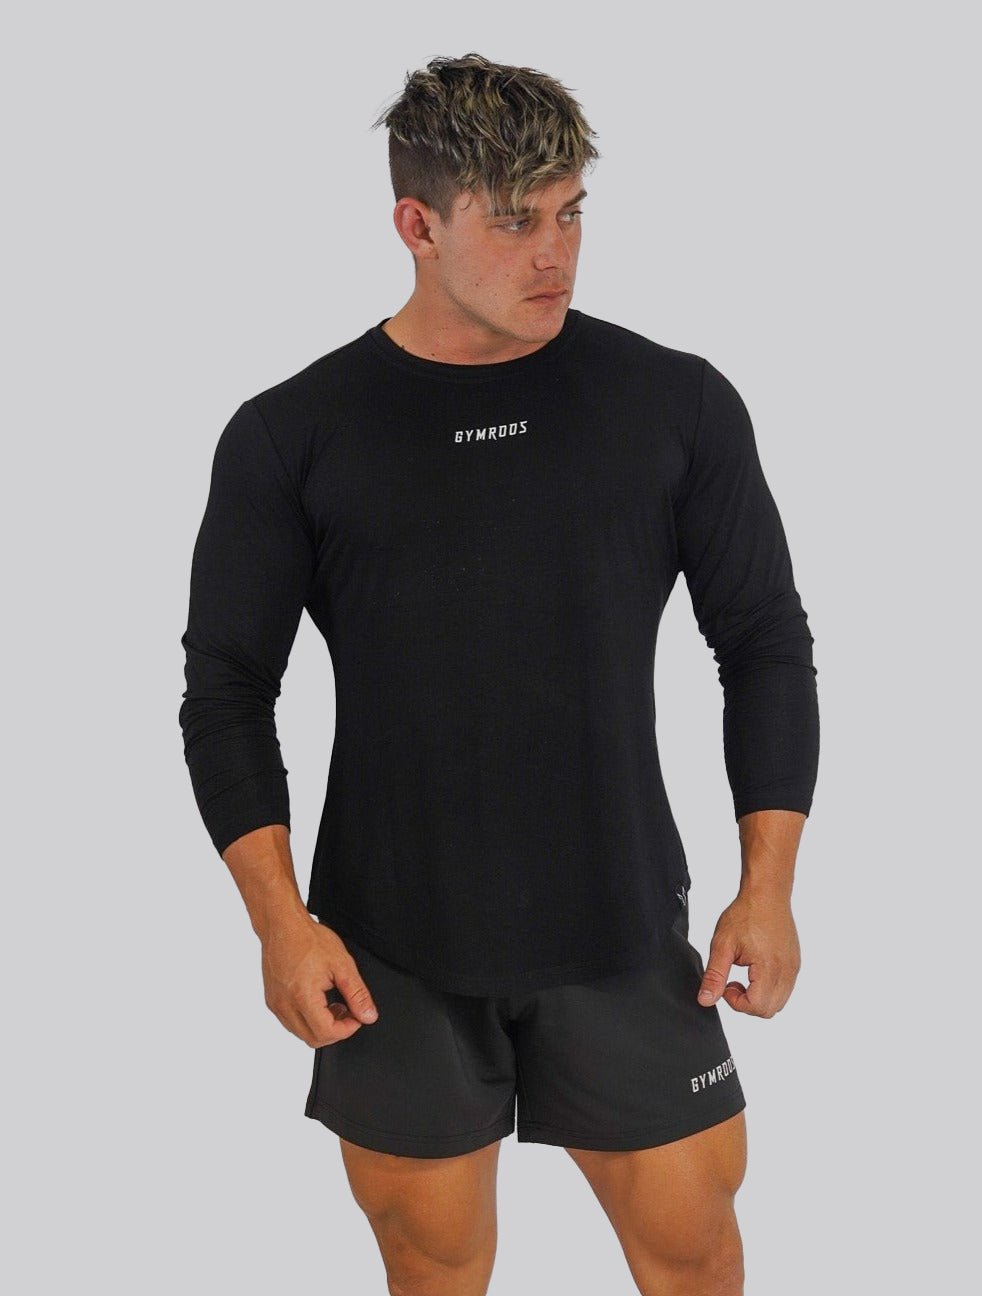 Culture Fitted Tee Long Sleeve - Black - GYMROOS